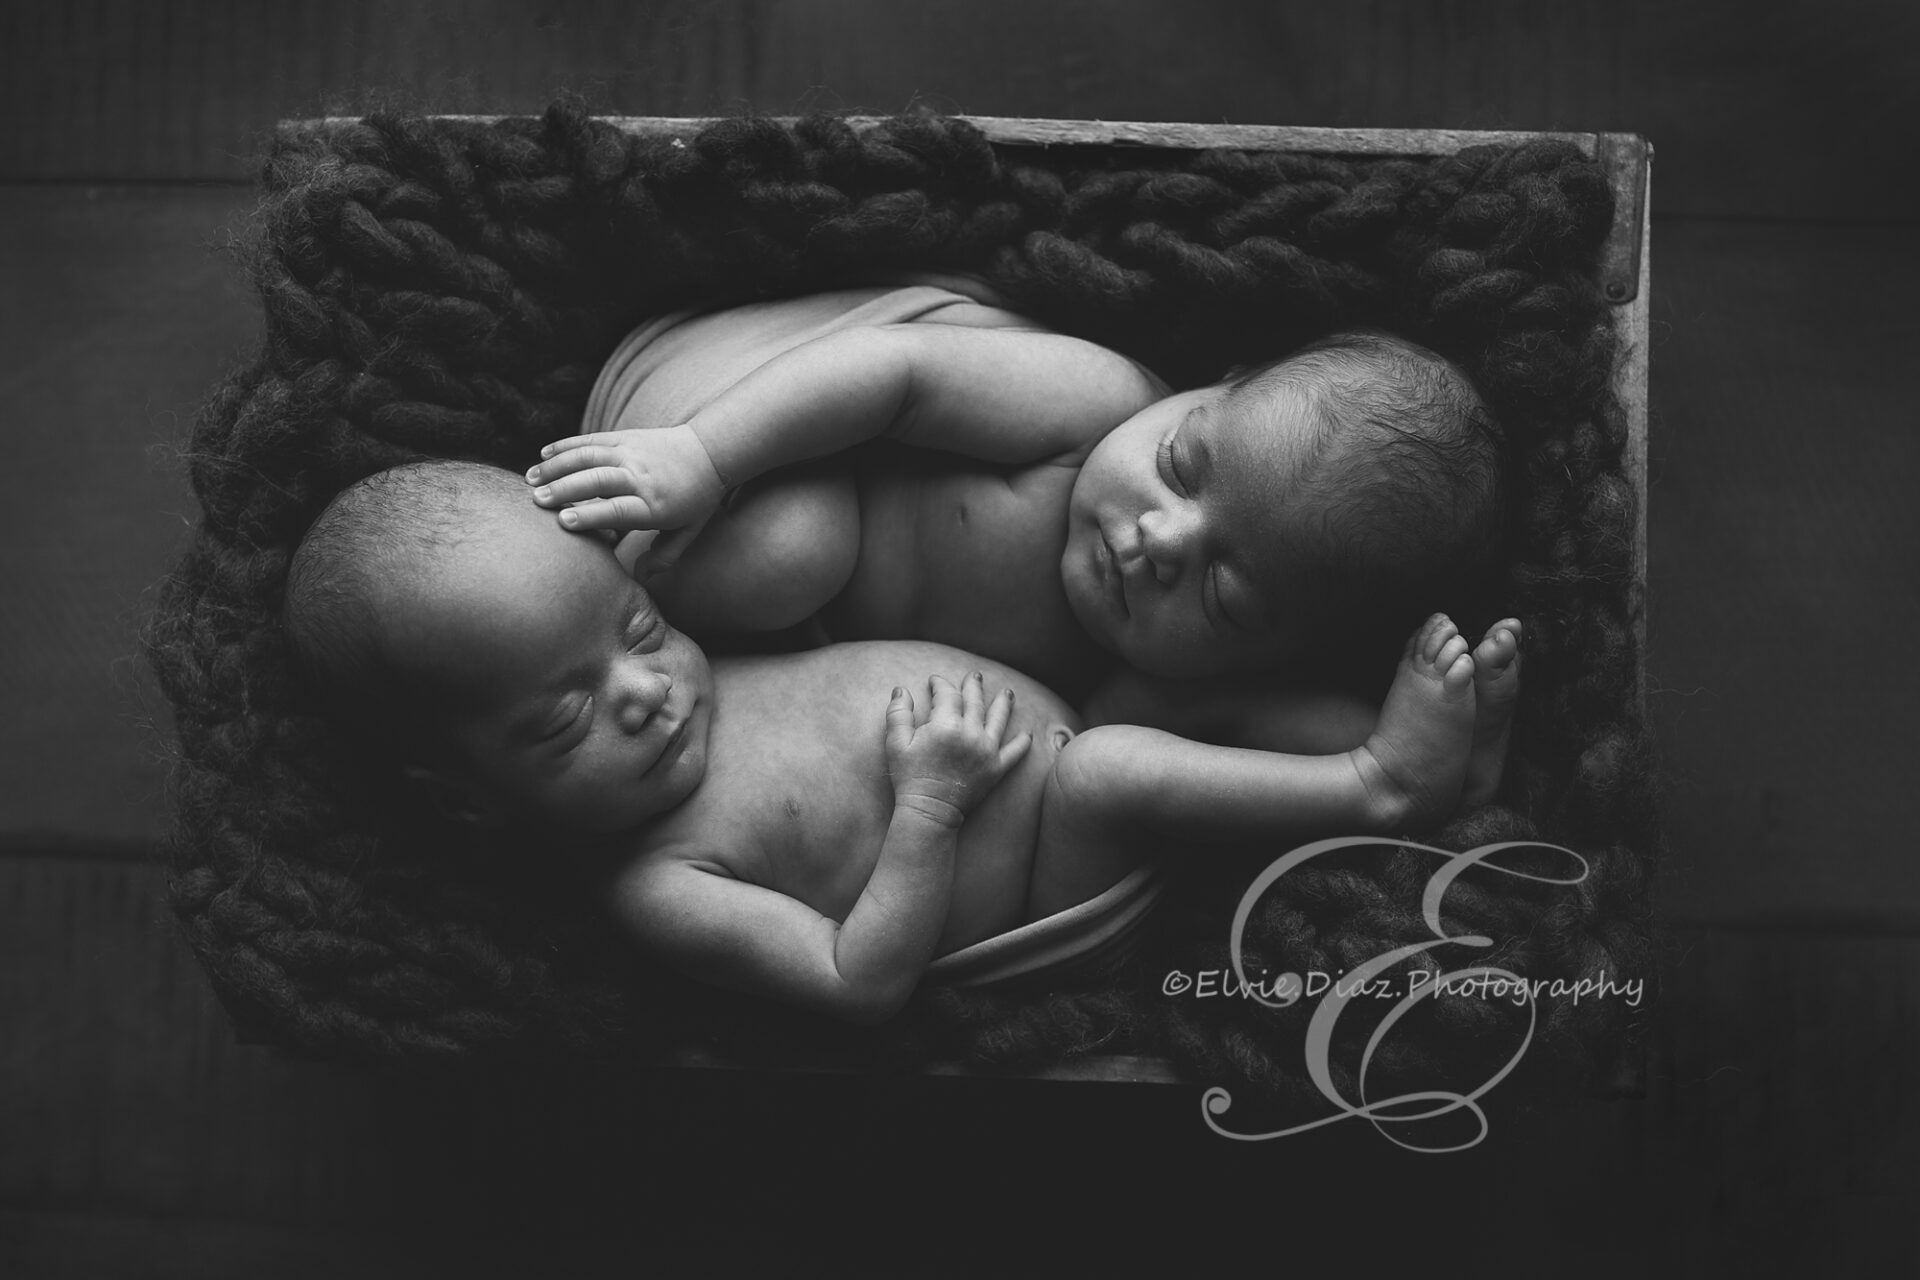 ElvieDiazPhotography-Chicago-Newborn-Photographer-Twin-Girls-bucket-posing-black-and-white-abstract-photography-art